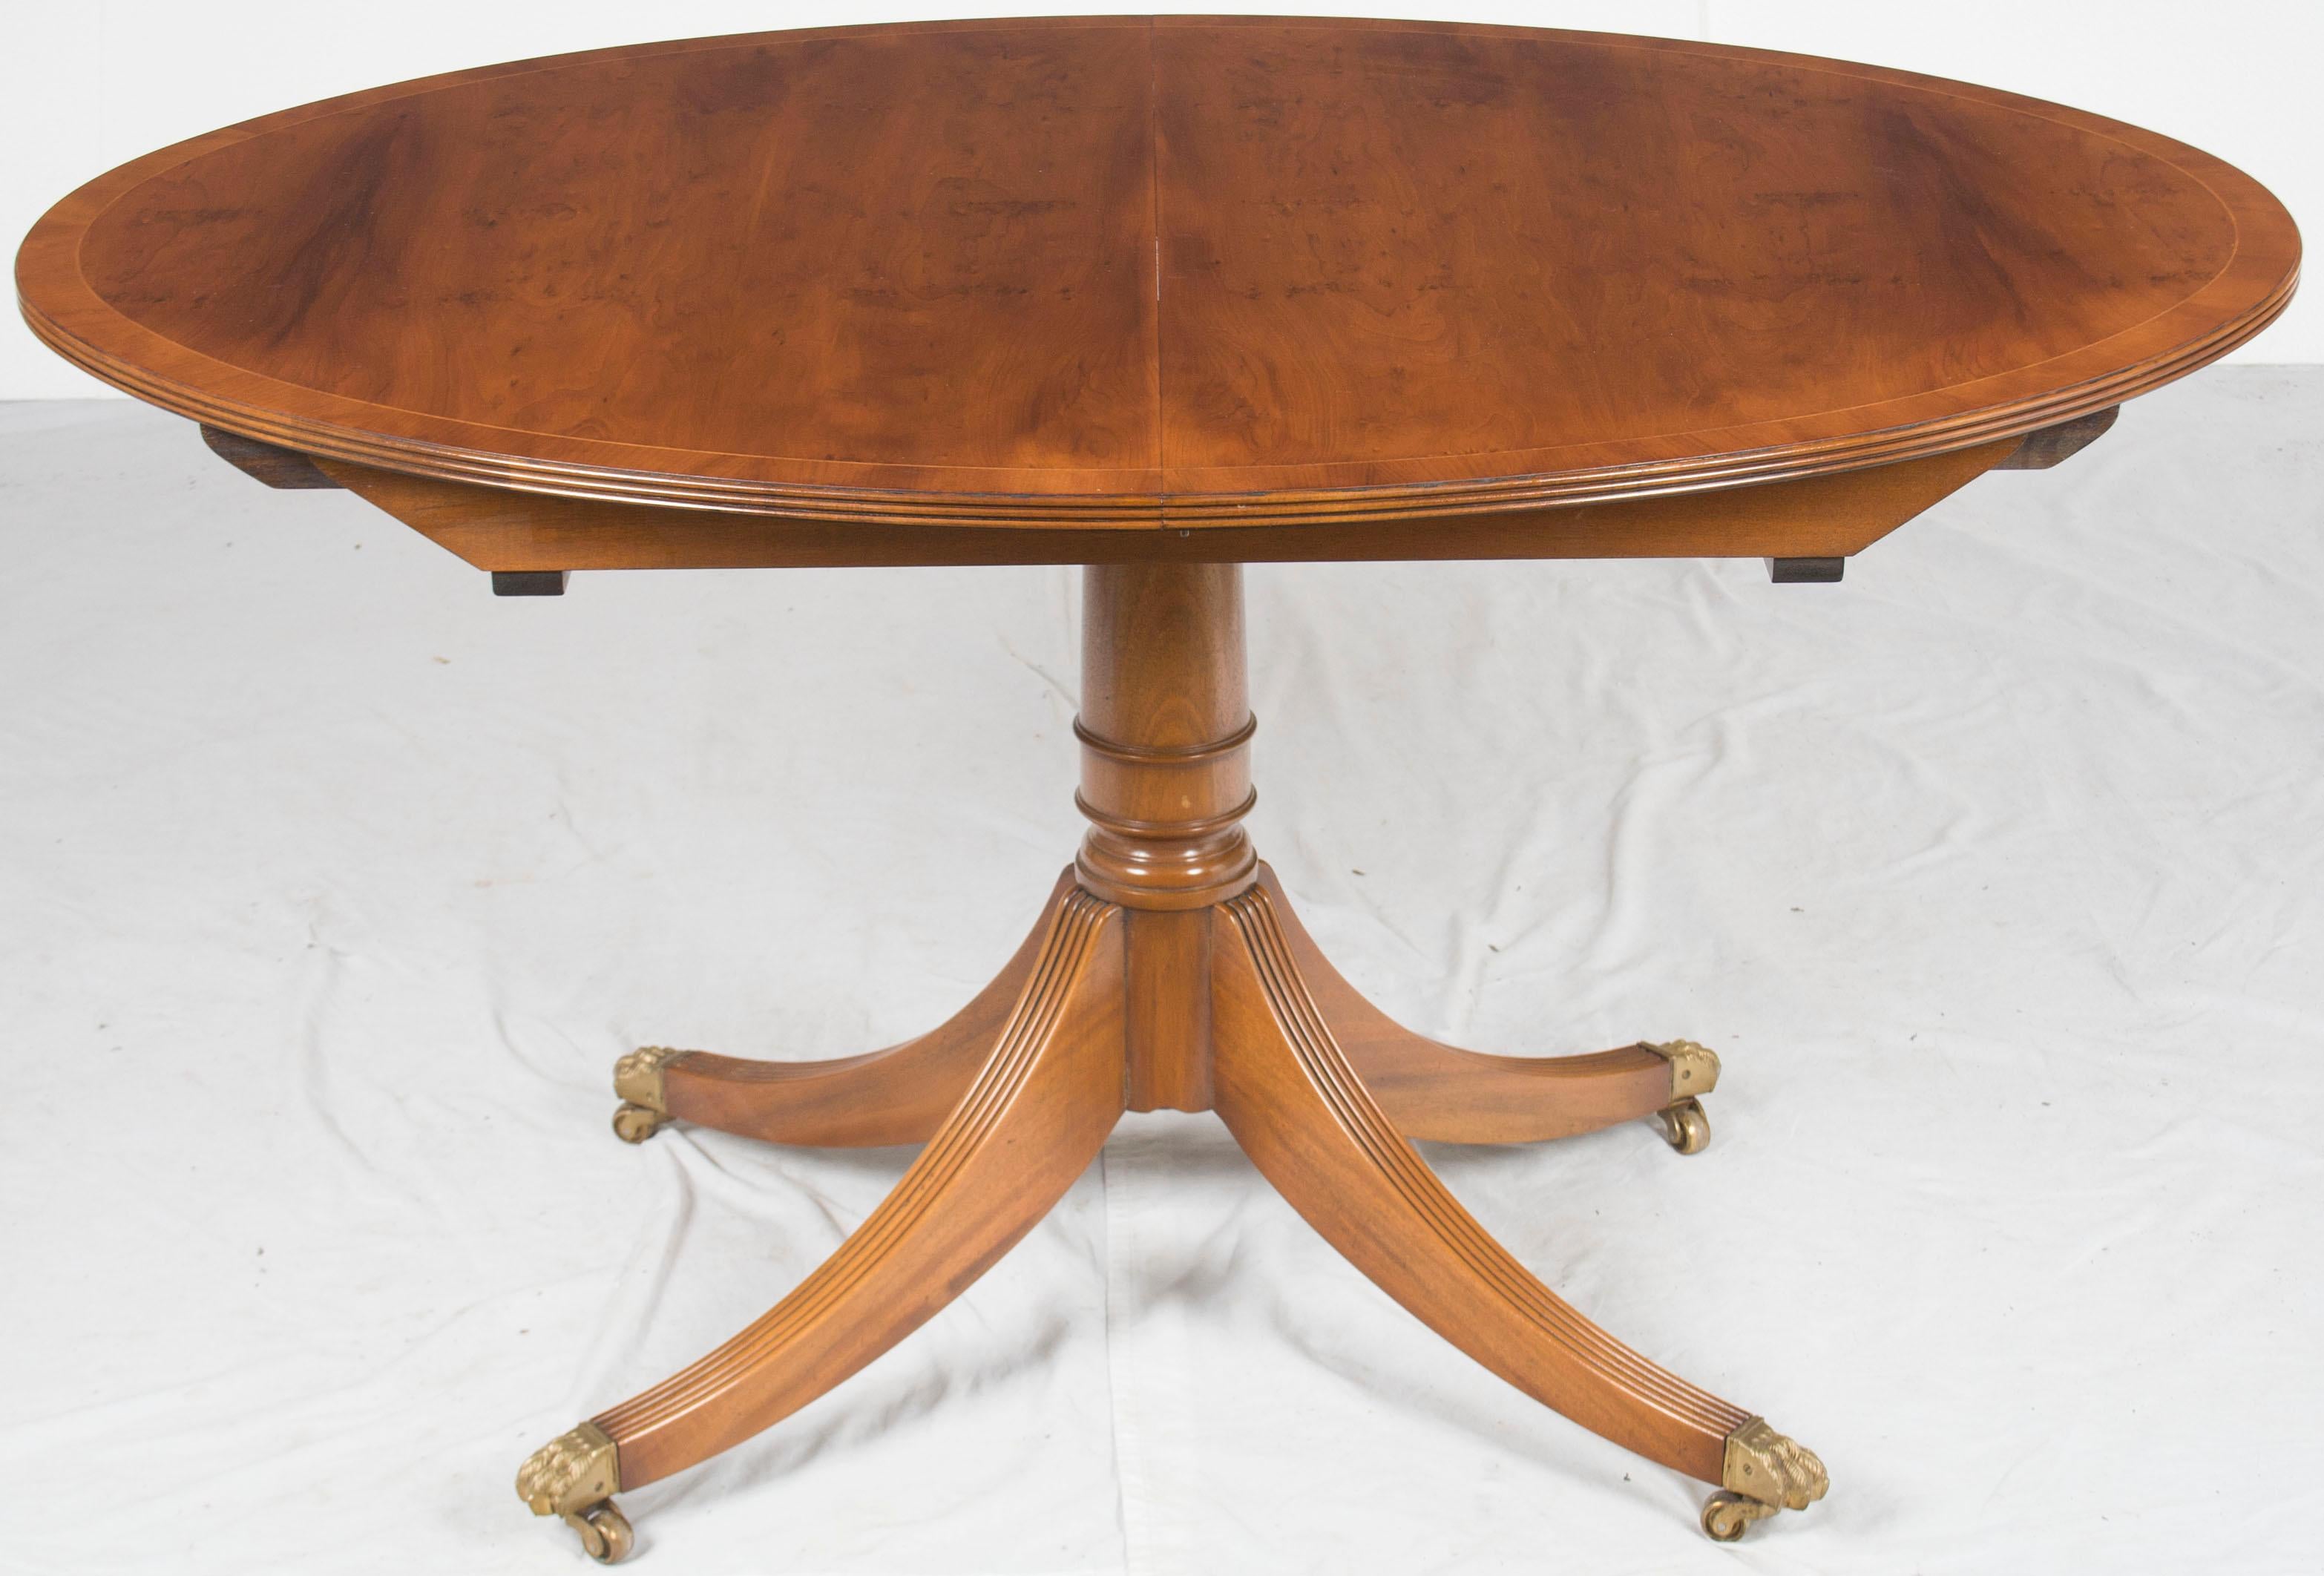 Oval Yew Wood Pedestal Dining Room Table with Leaf 3